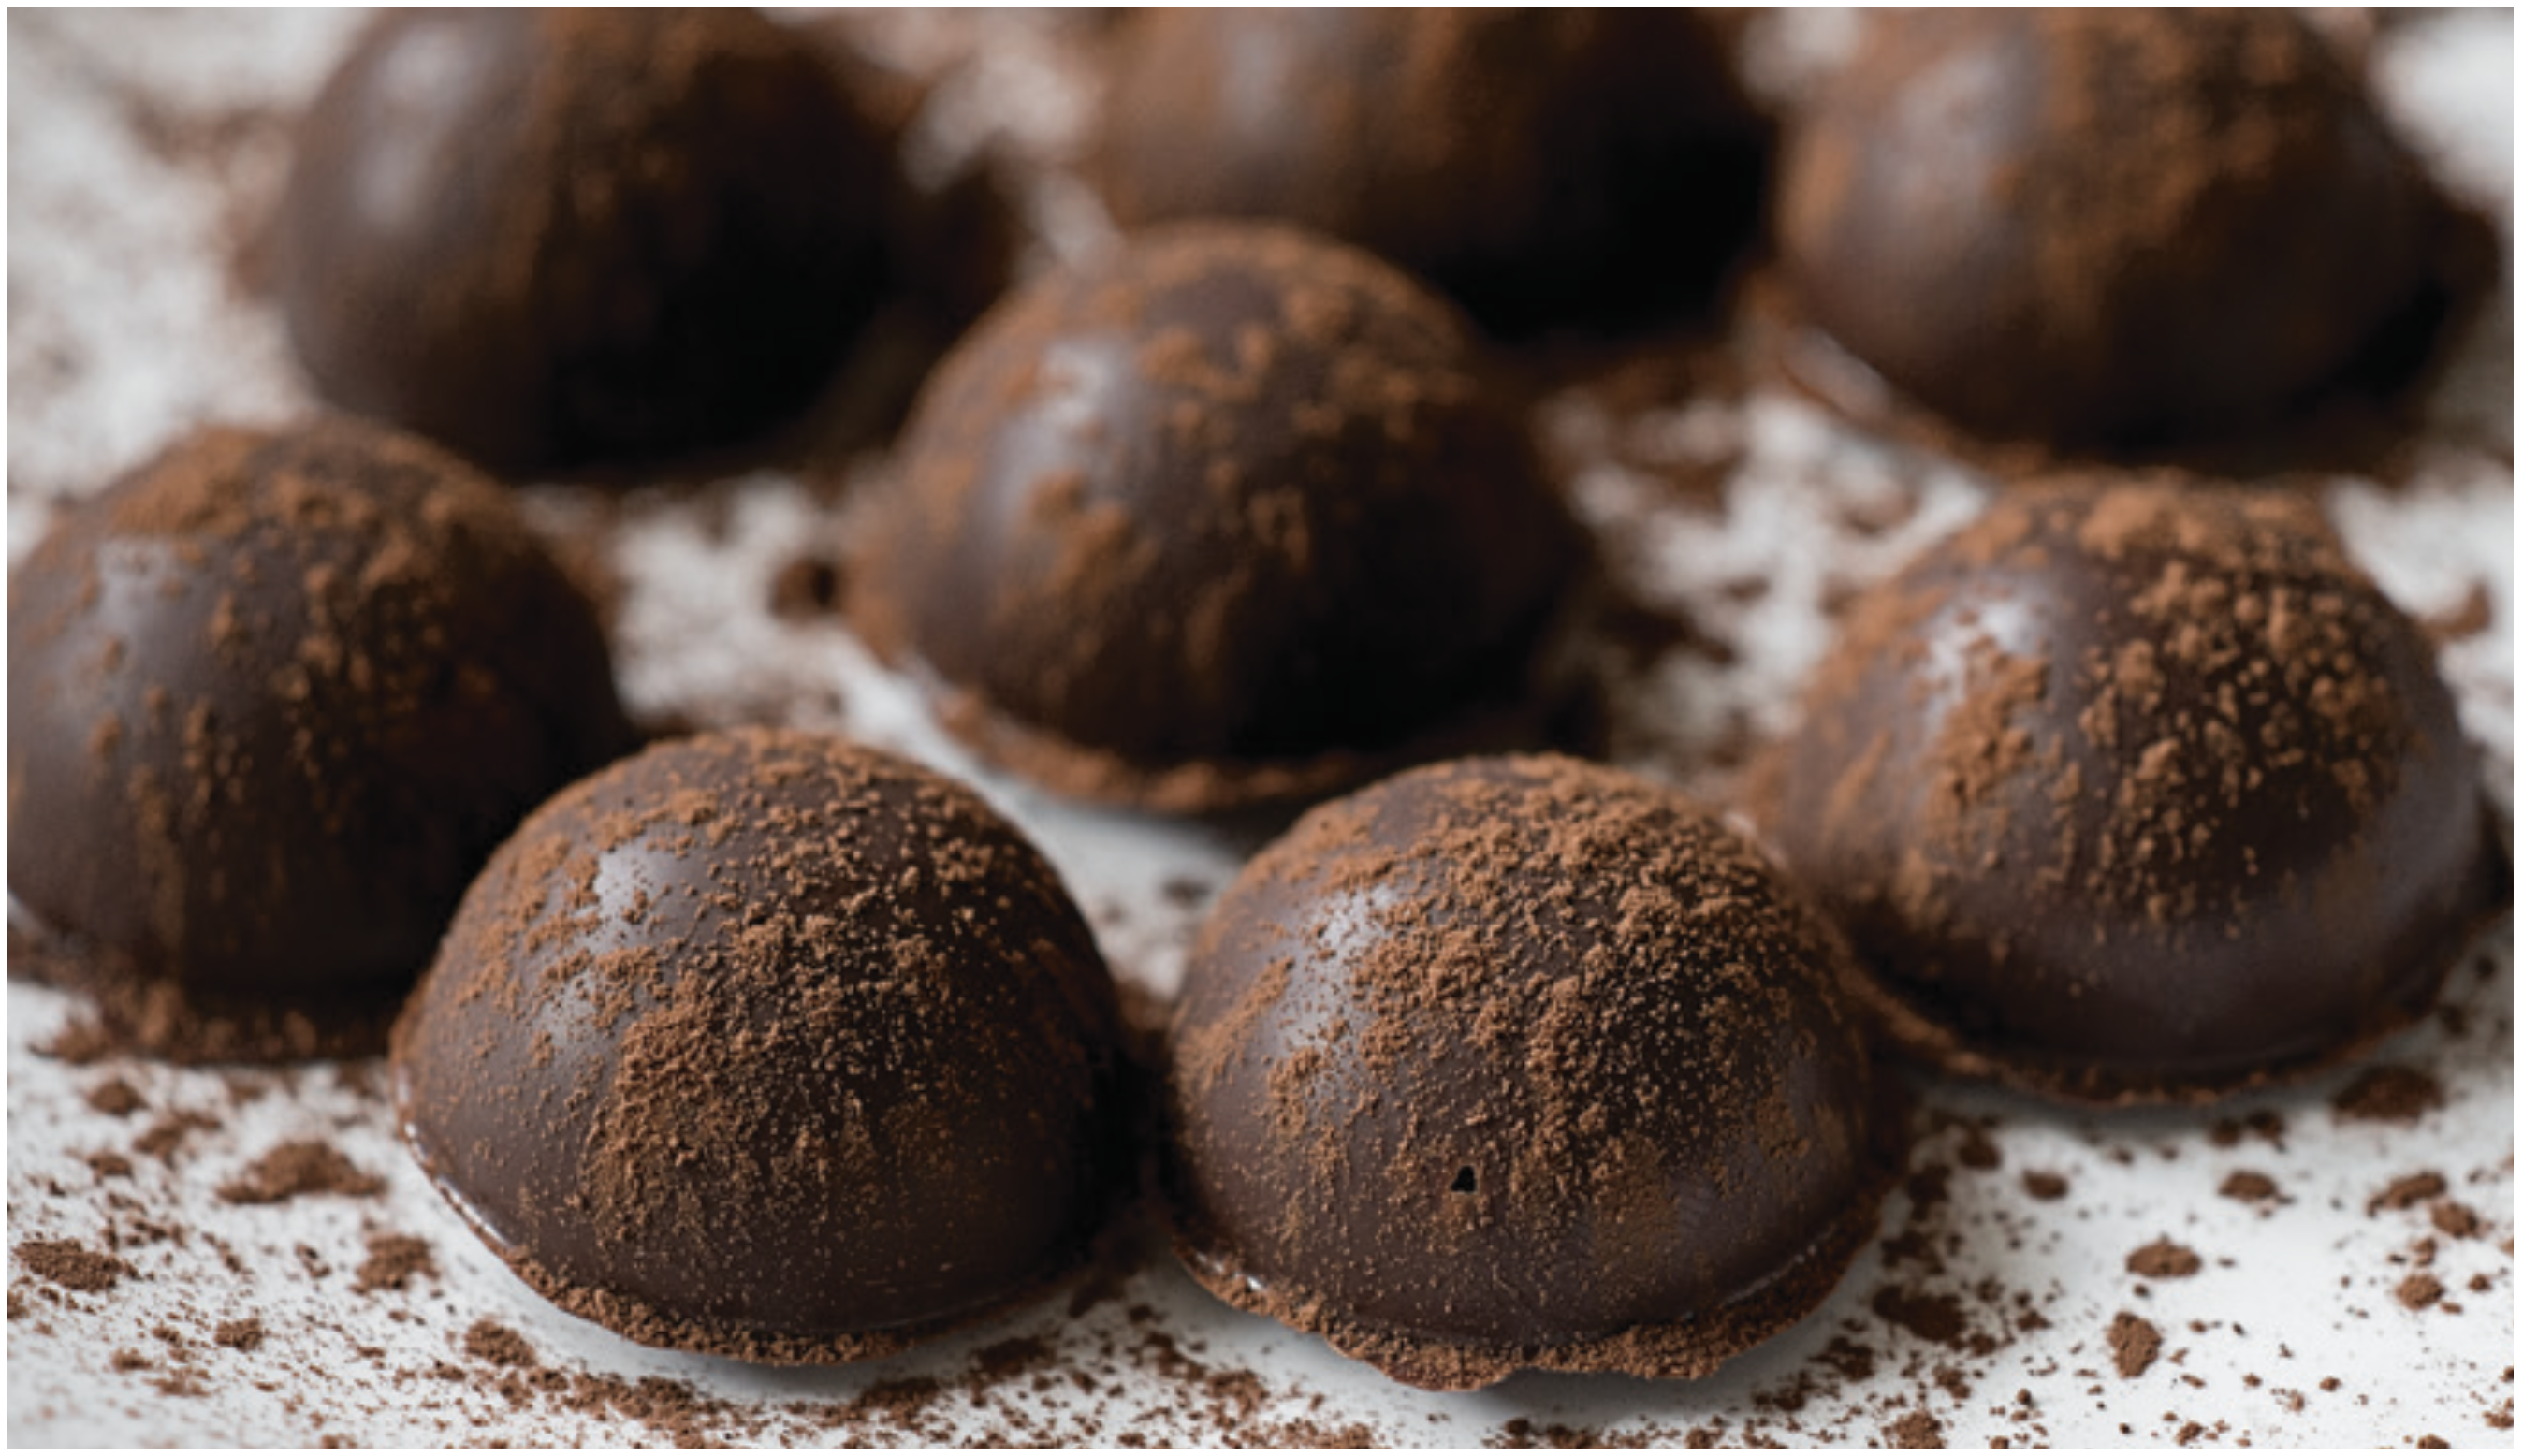 Lime ginger and dark chocolate truffles with magic mushrooms